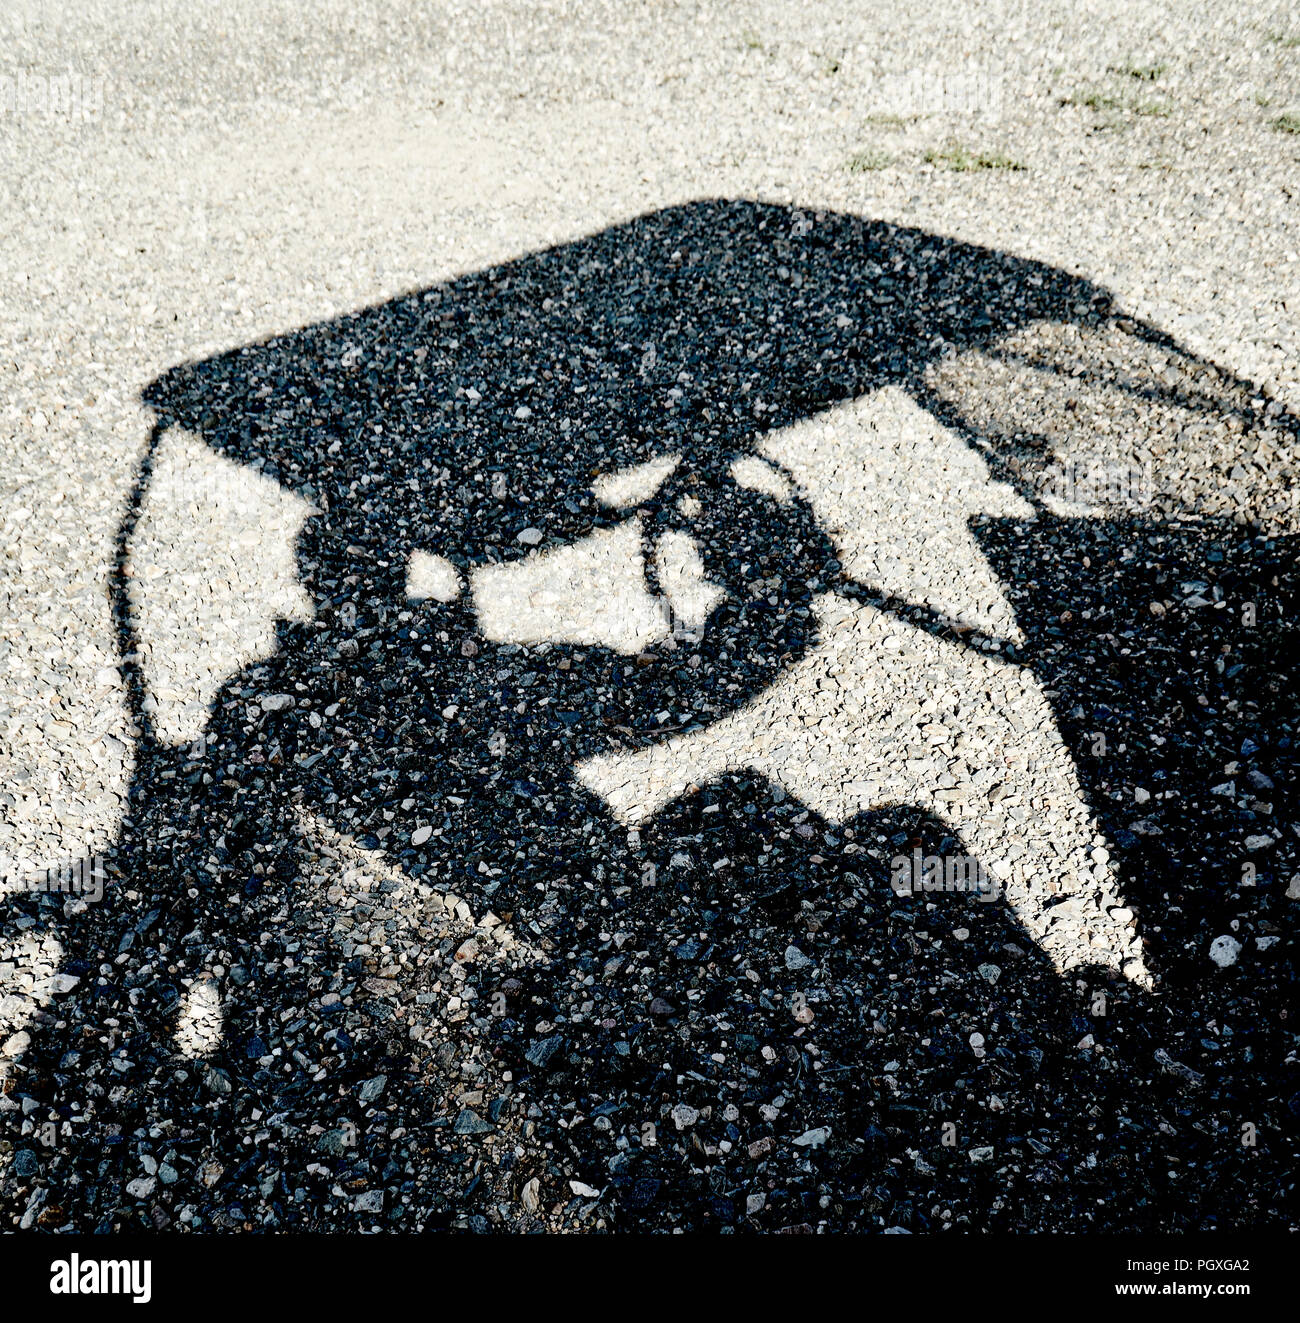 Shadow of a person driving a golf cart  reflected on a gravel ground Stock Photo